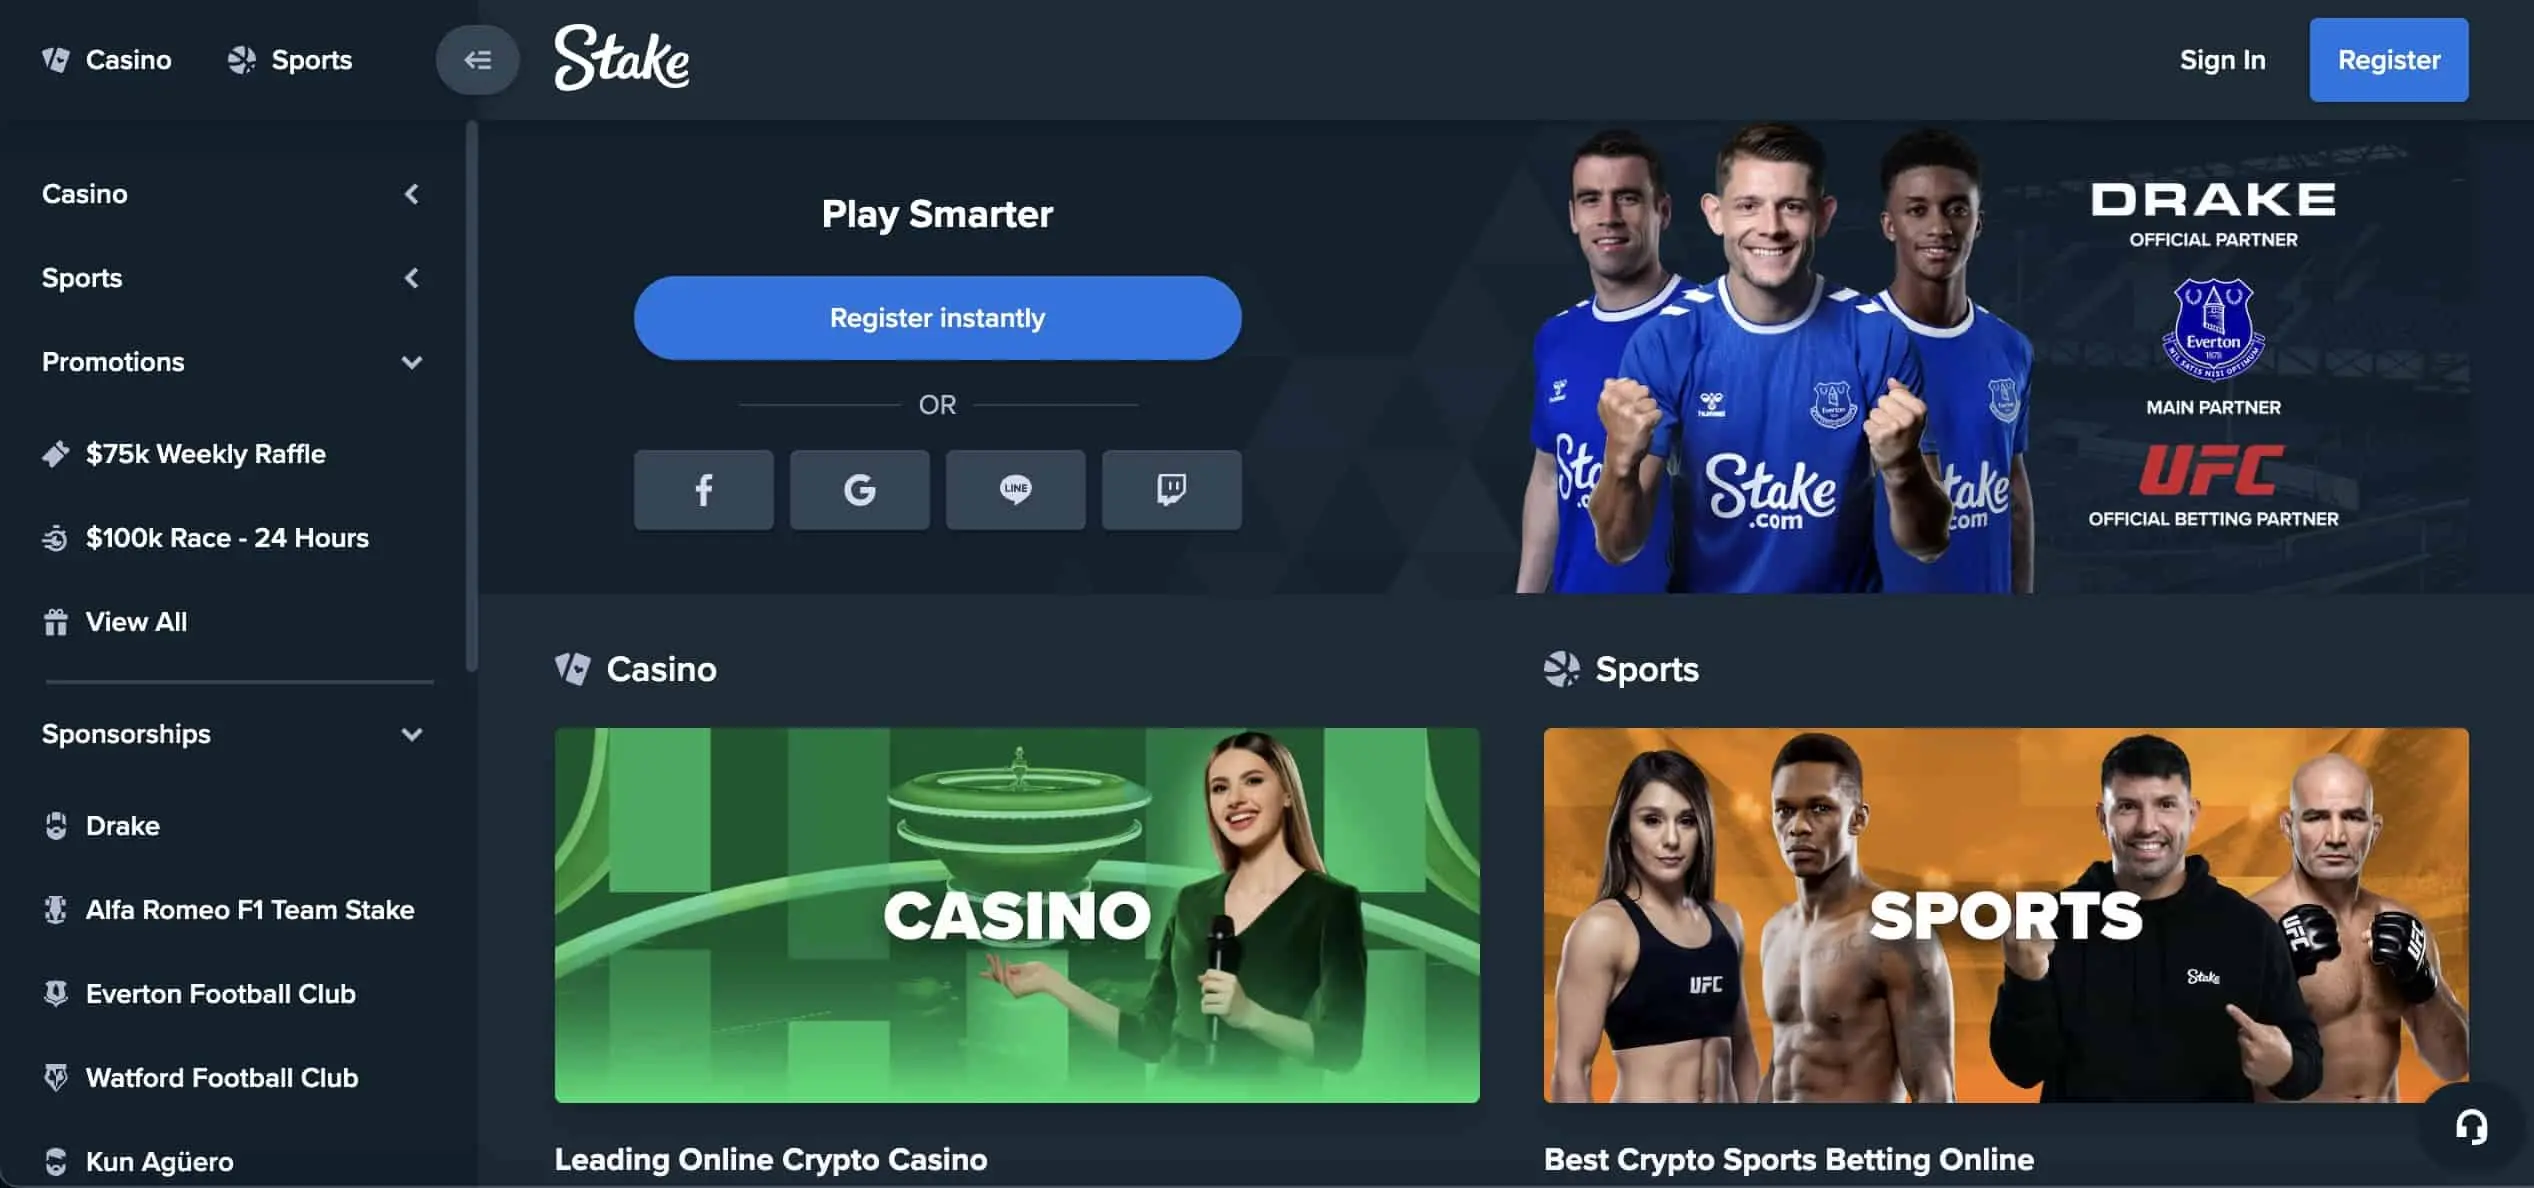 Stake casino review homepage